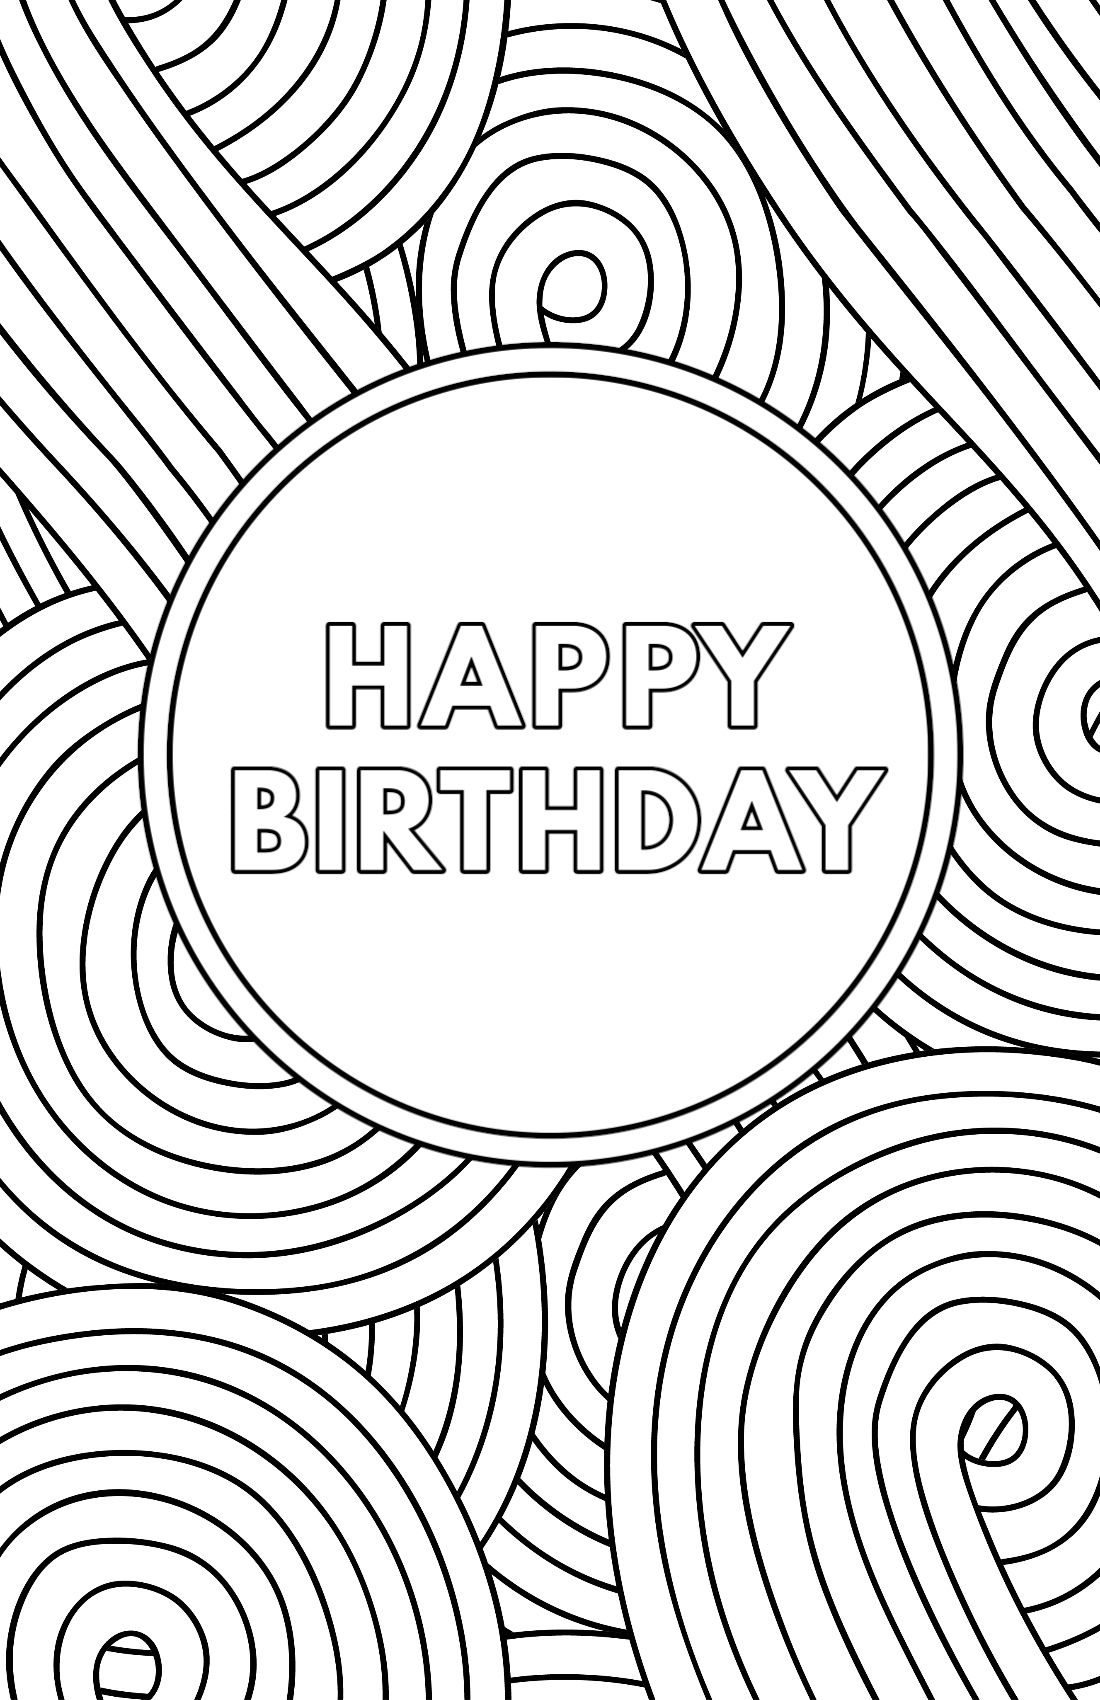 Printable Birthday Cards To Color_93255